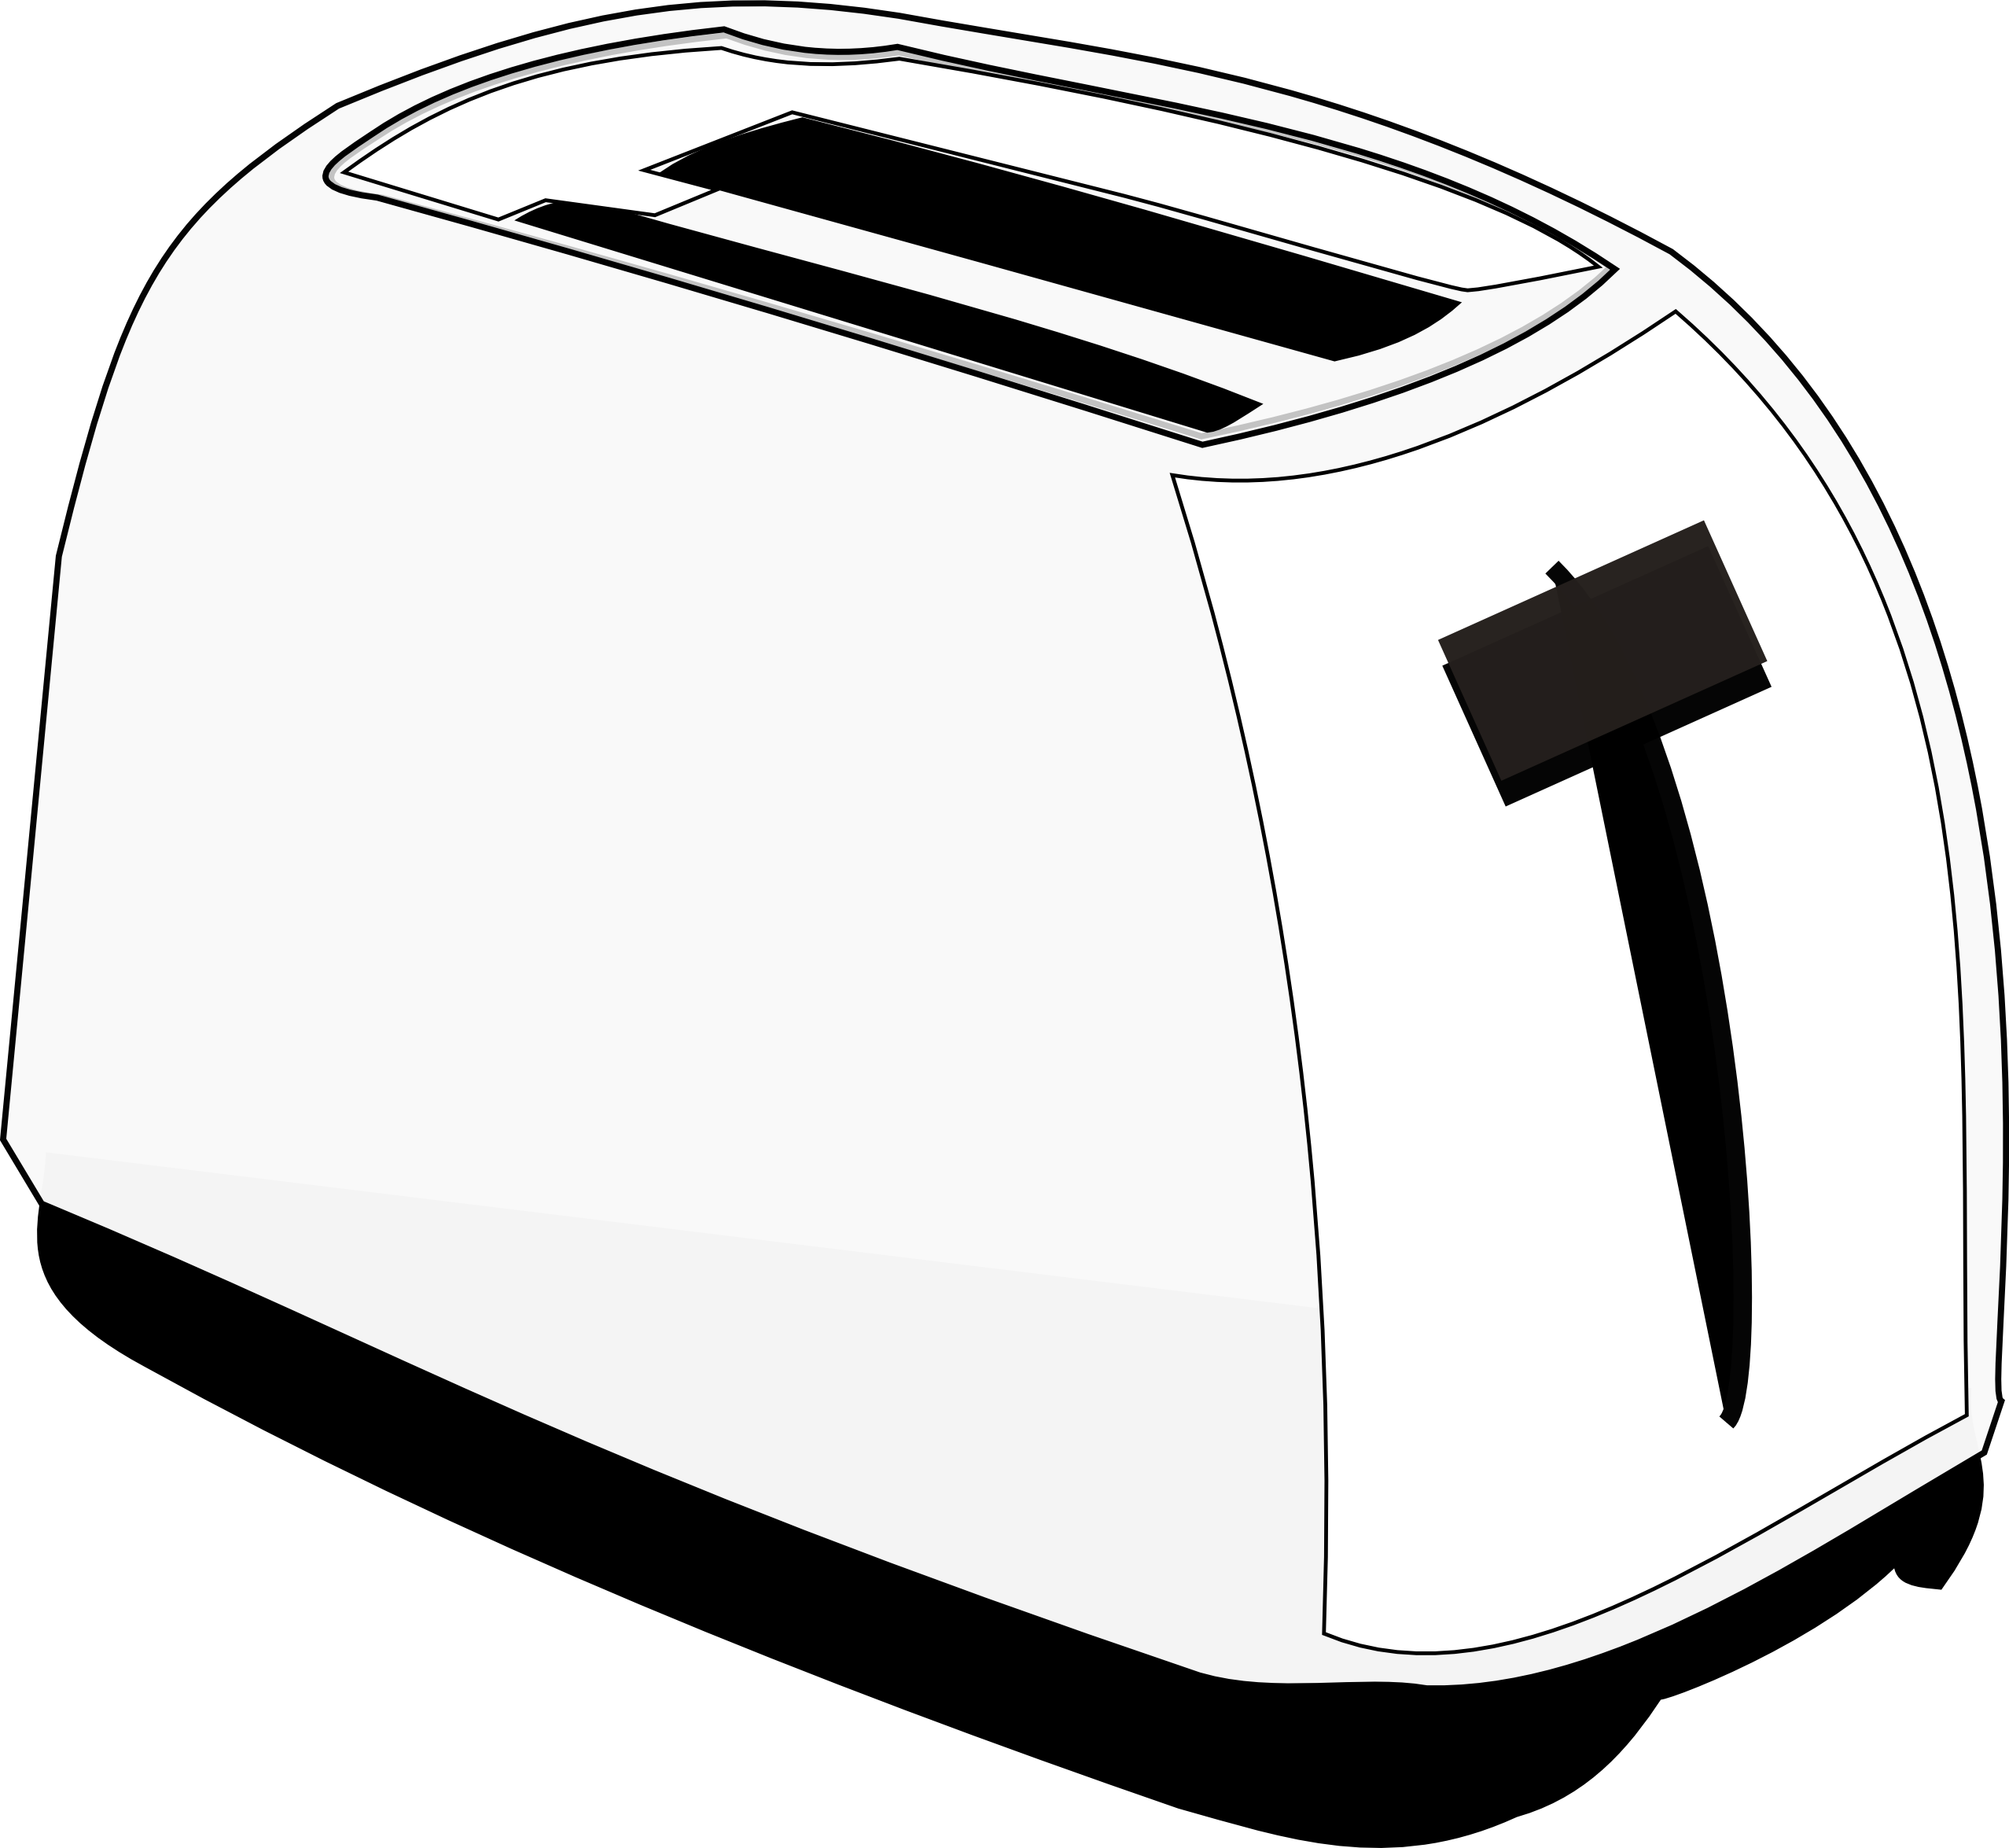 Toaster Images - Cliparts.co